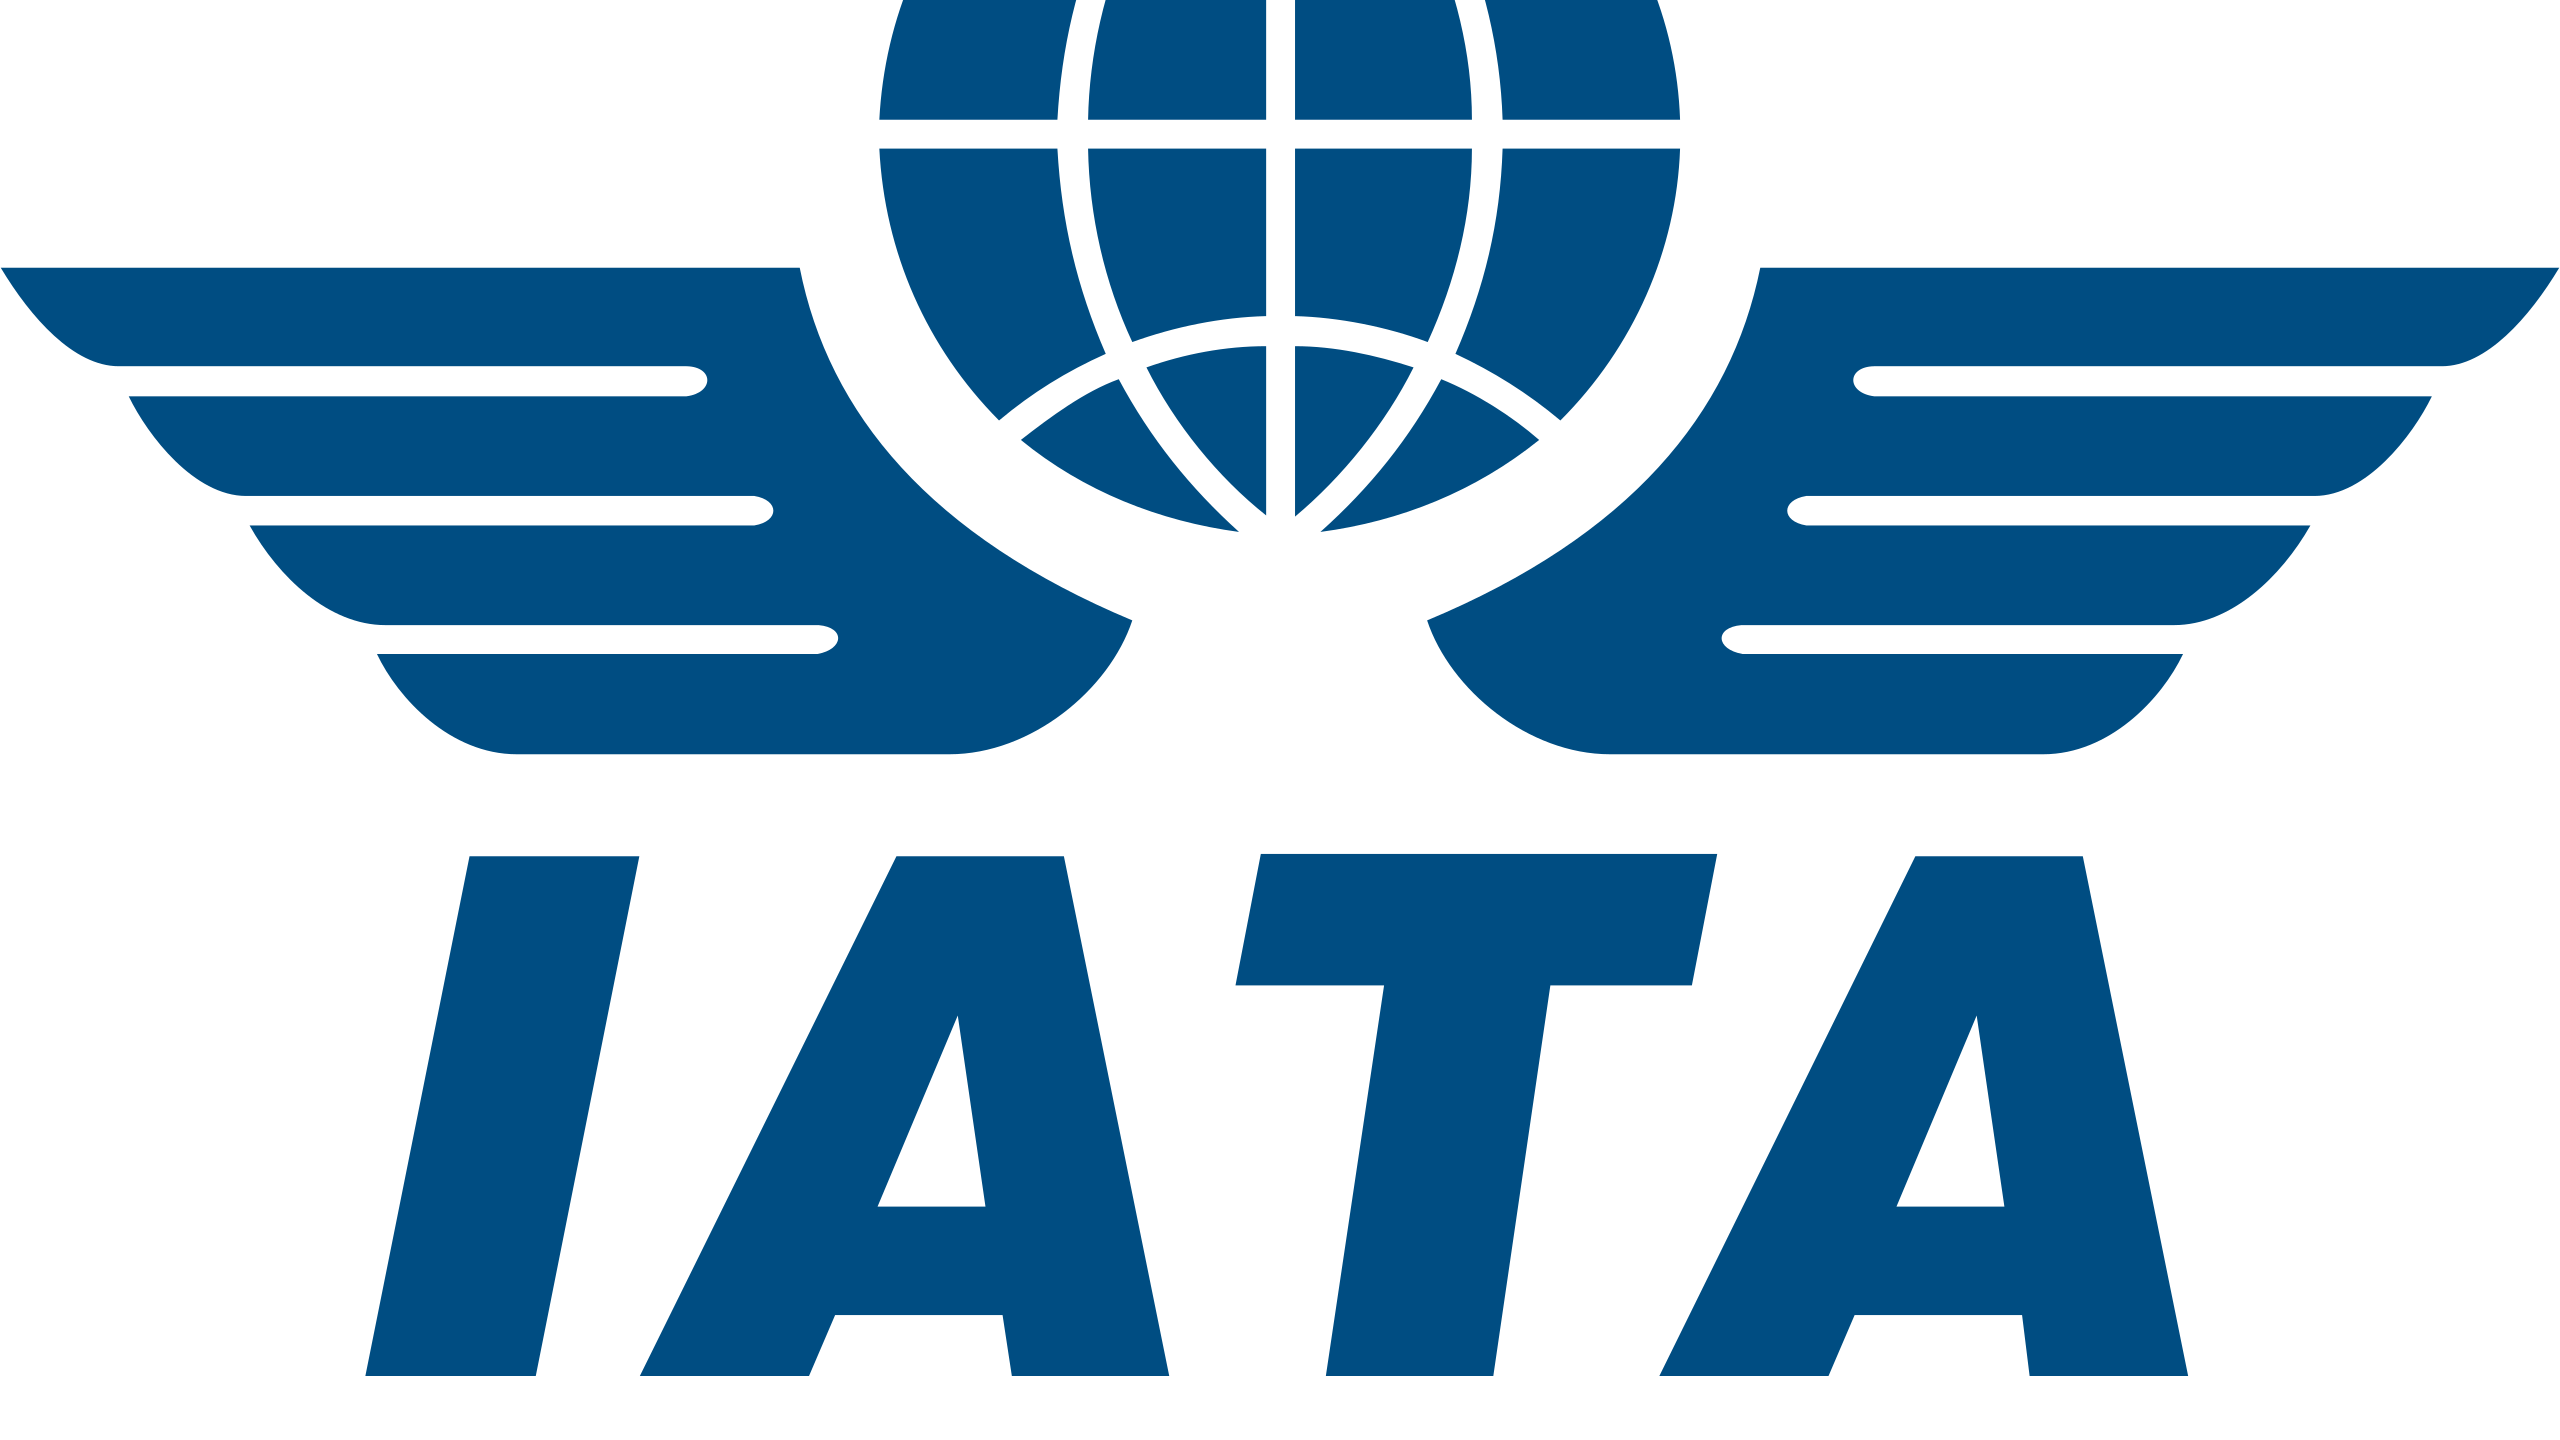 https://adgully.me/post/1278/iata-reports-846-growth-in-travel-for-middle-eastern-airlines-in-november